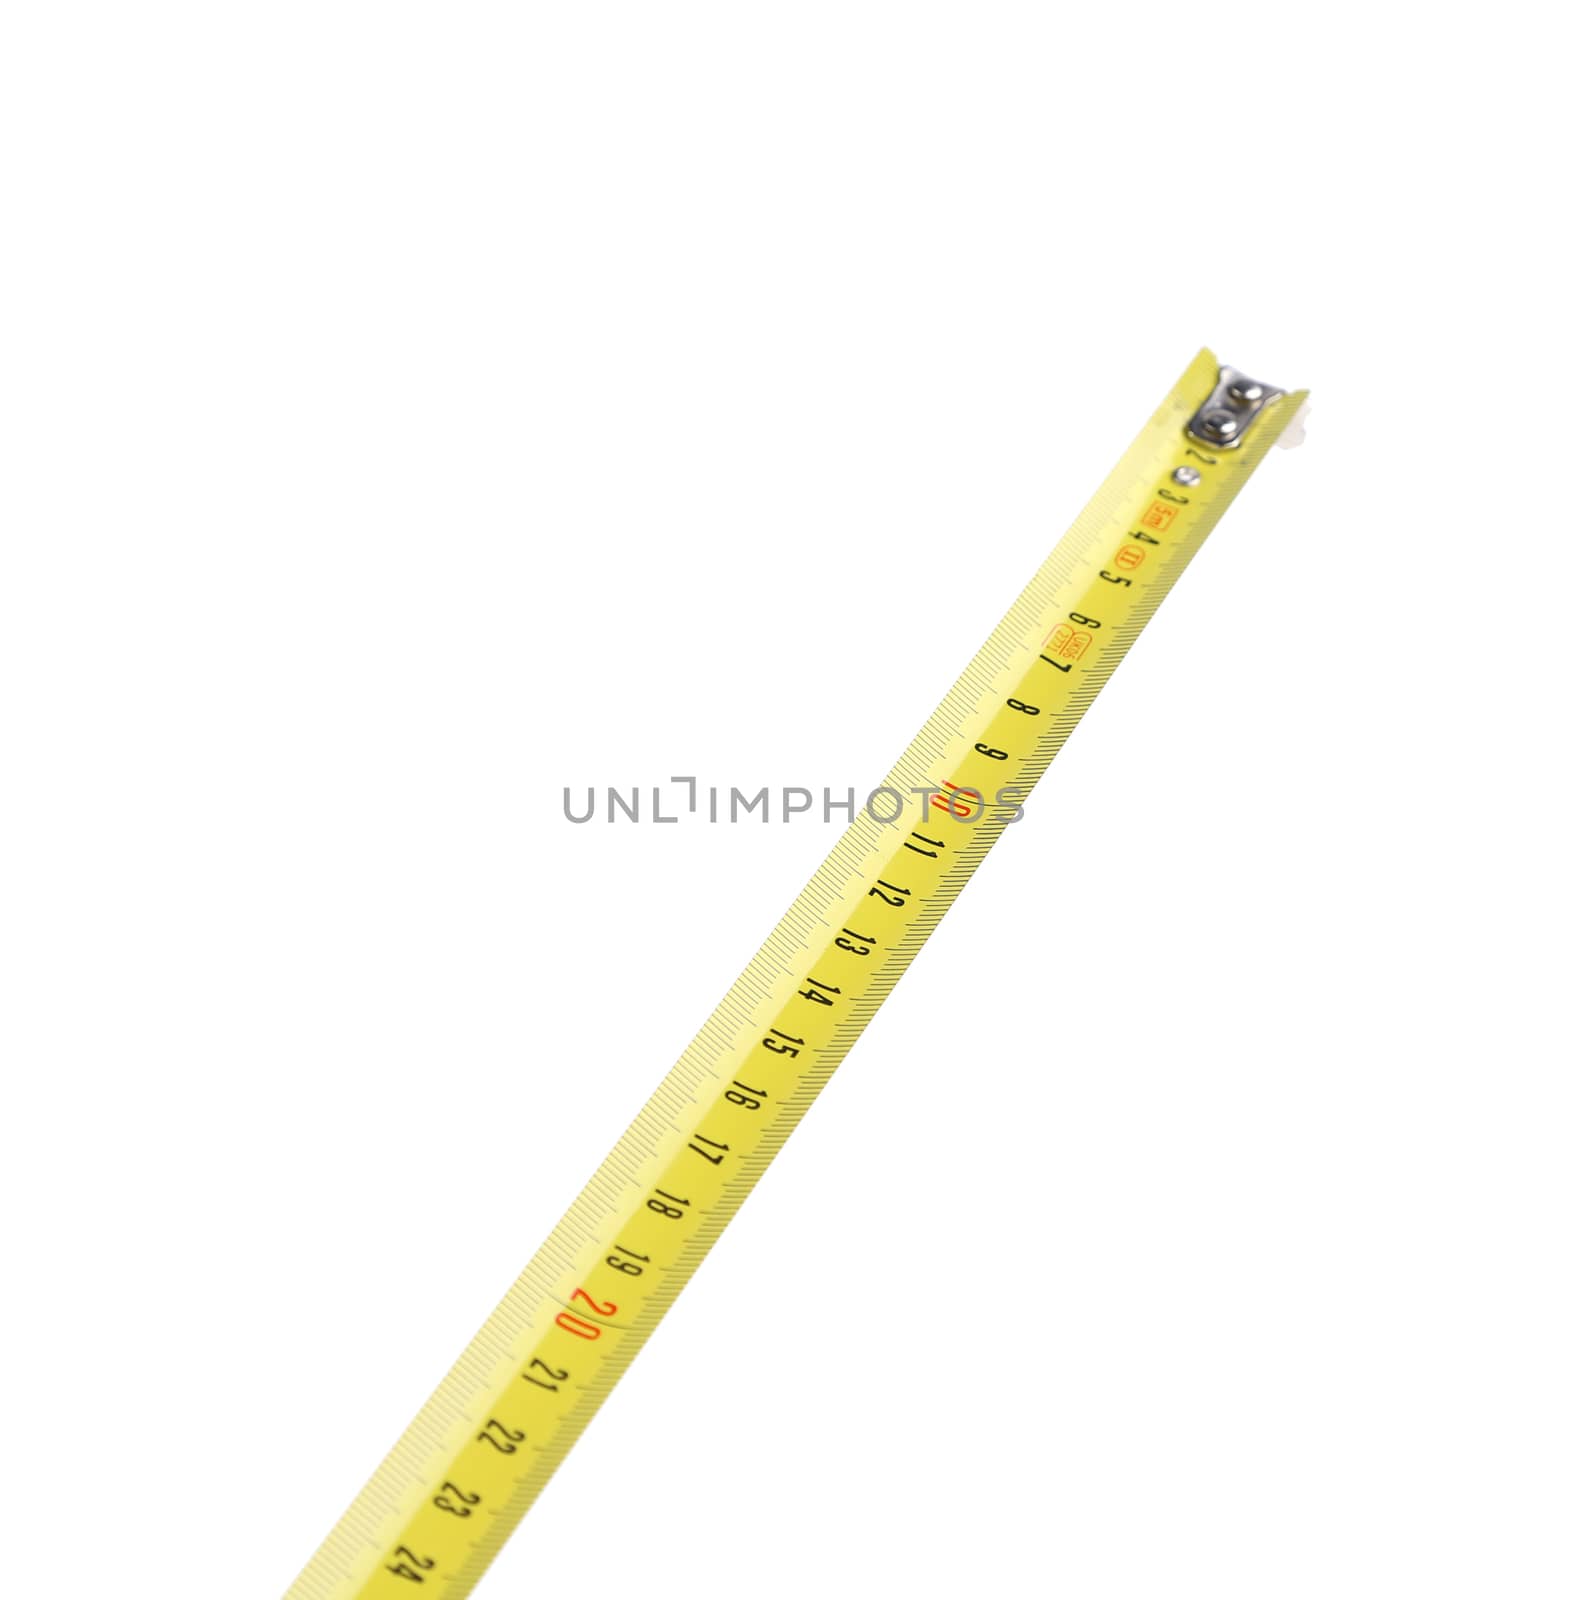 Tape Measure by diagonal. Isolated on a white background.